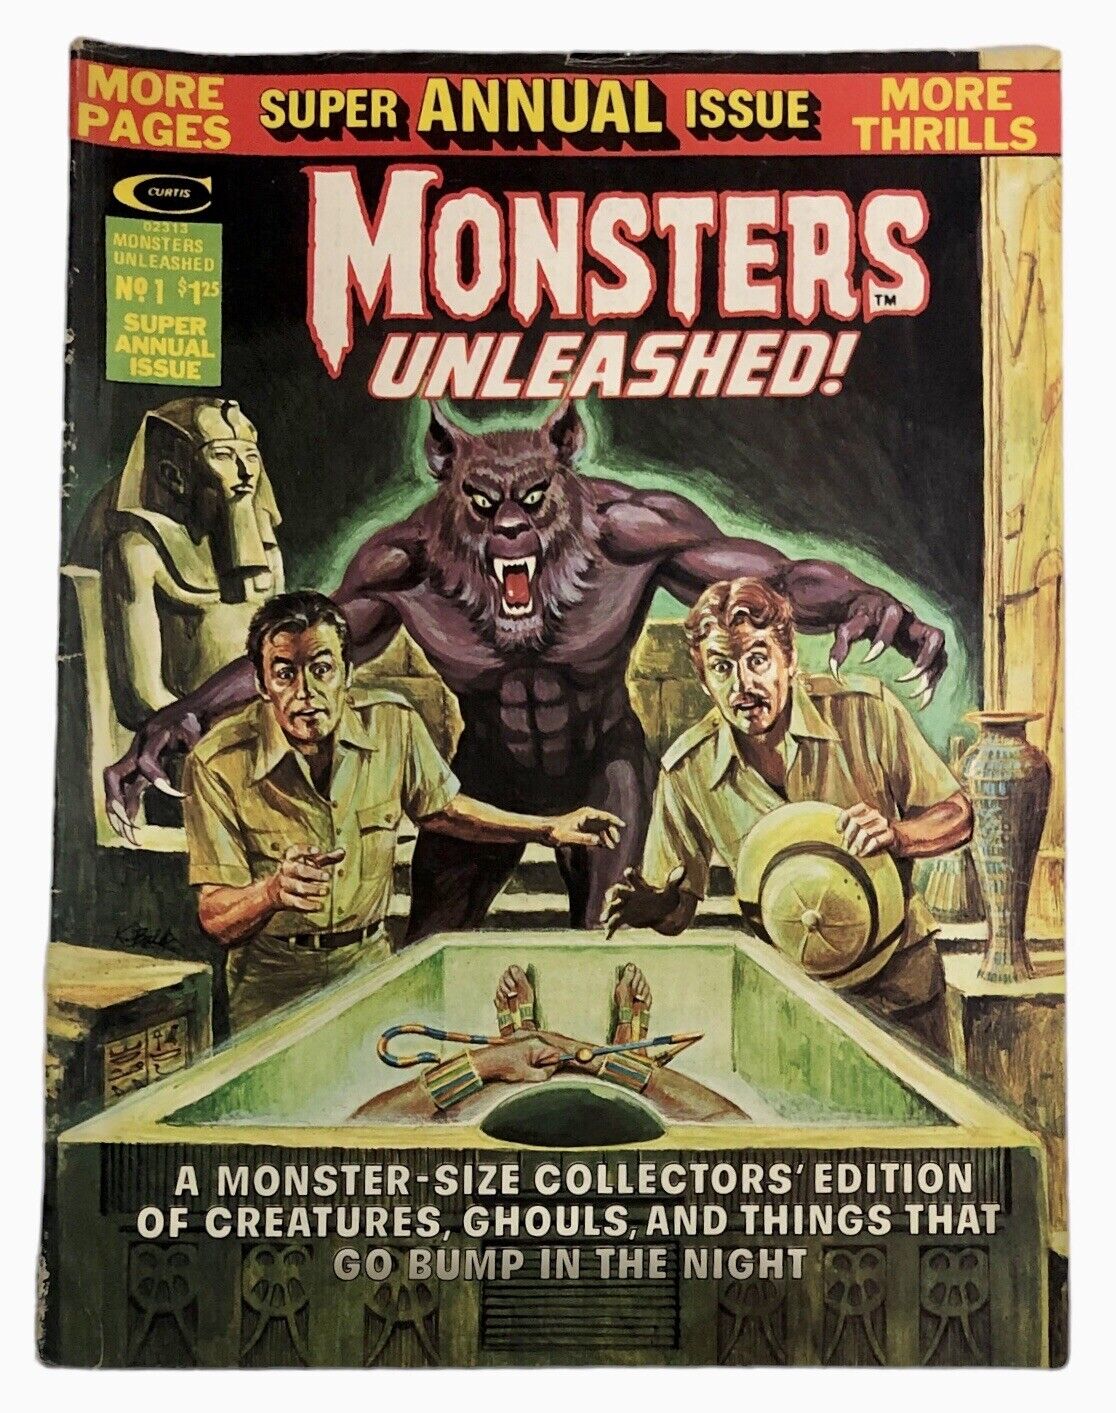 Monsters Unleashed Annual # Summer 19751 Kane Art Super Annual Issue ￼